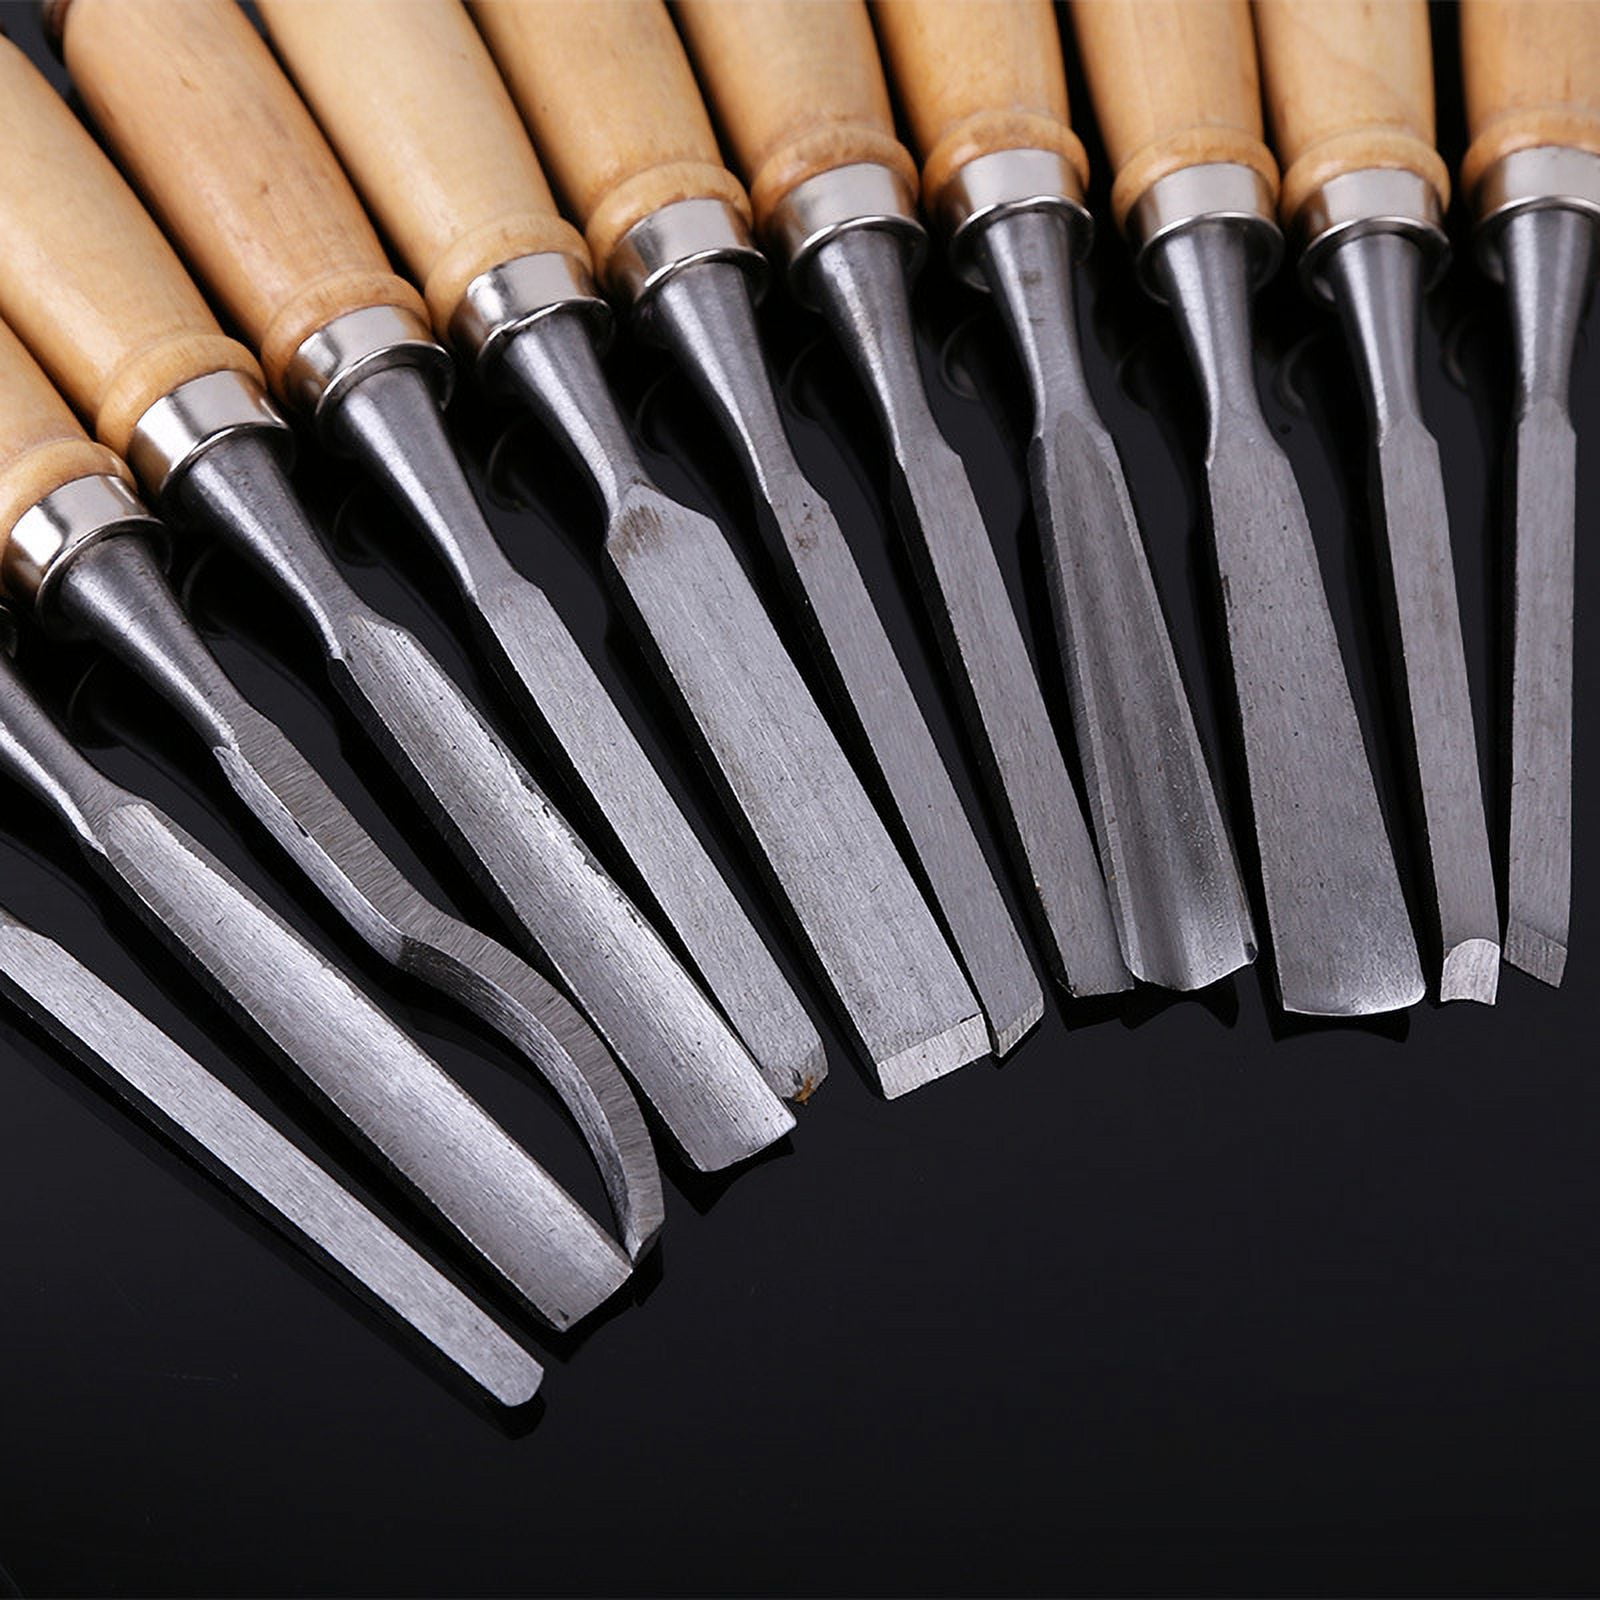 Laa-Loo 12-Piece Carving Chisels – Maple Springs